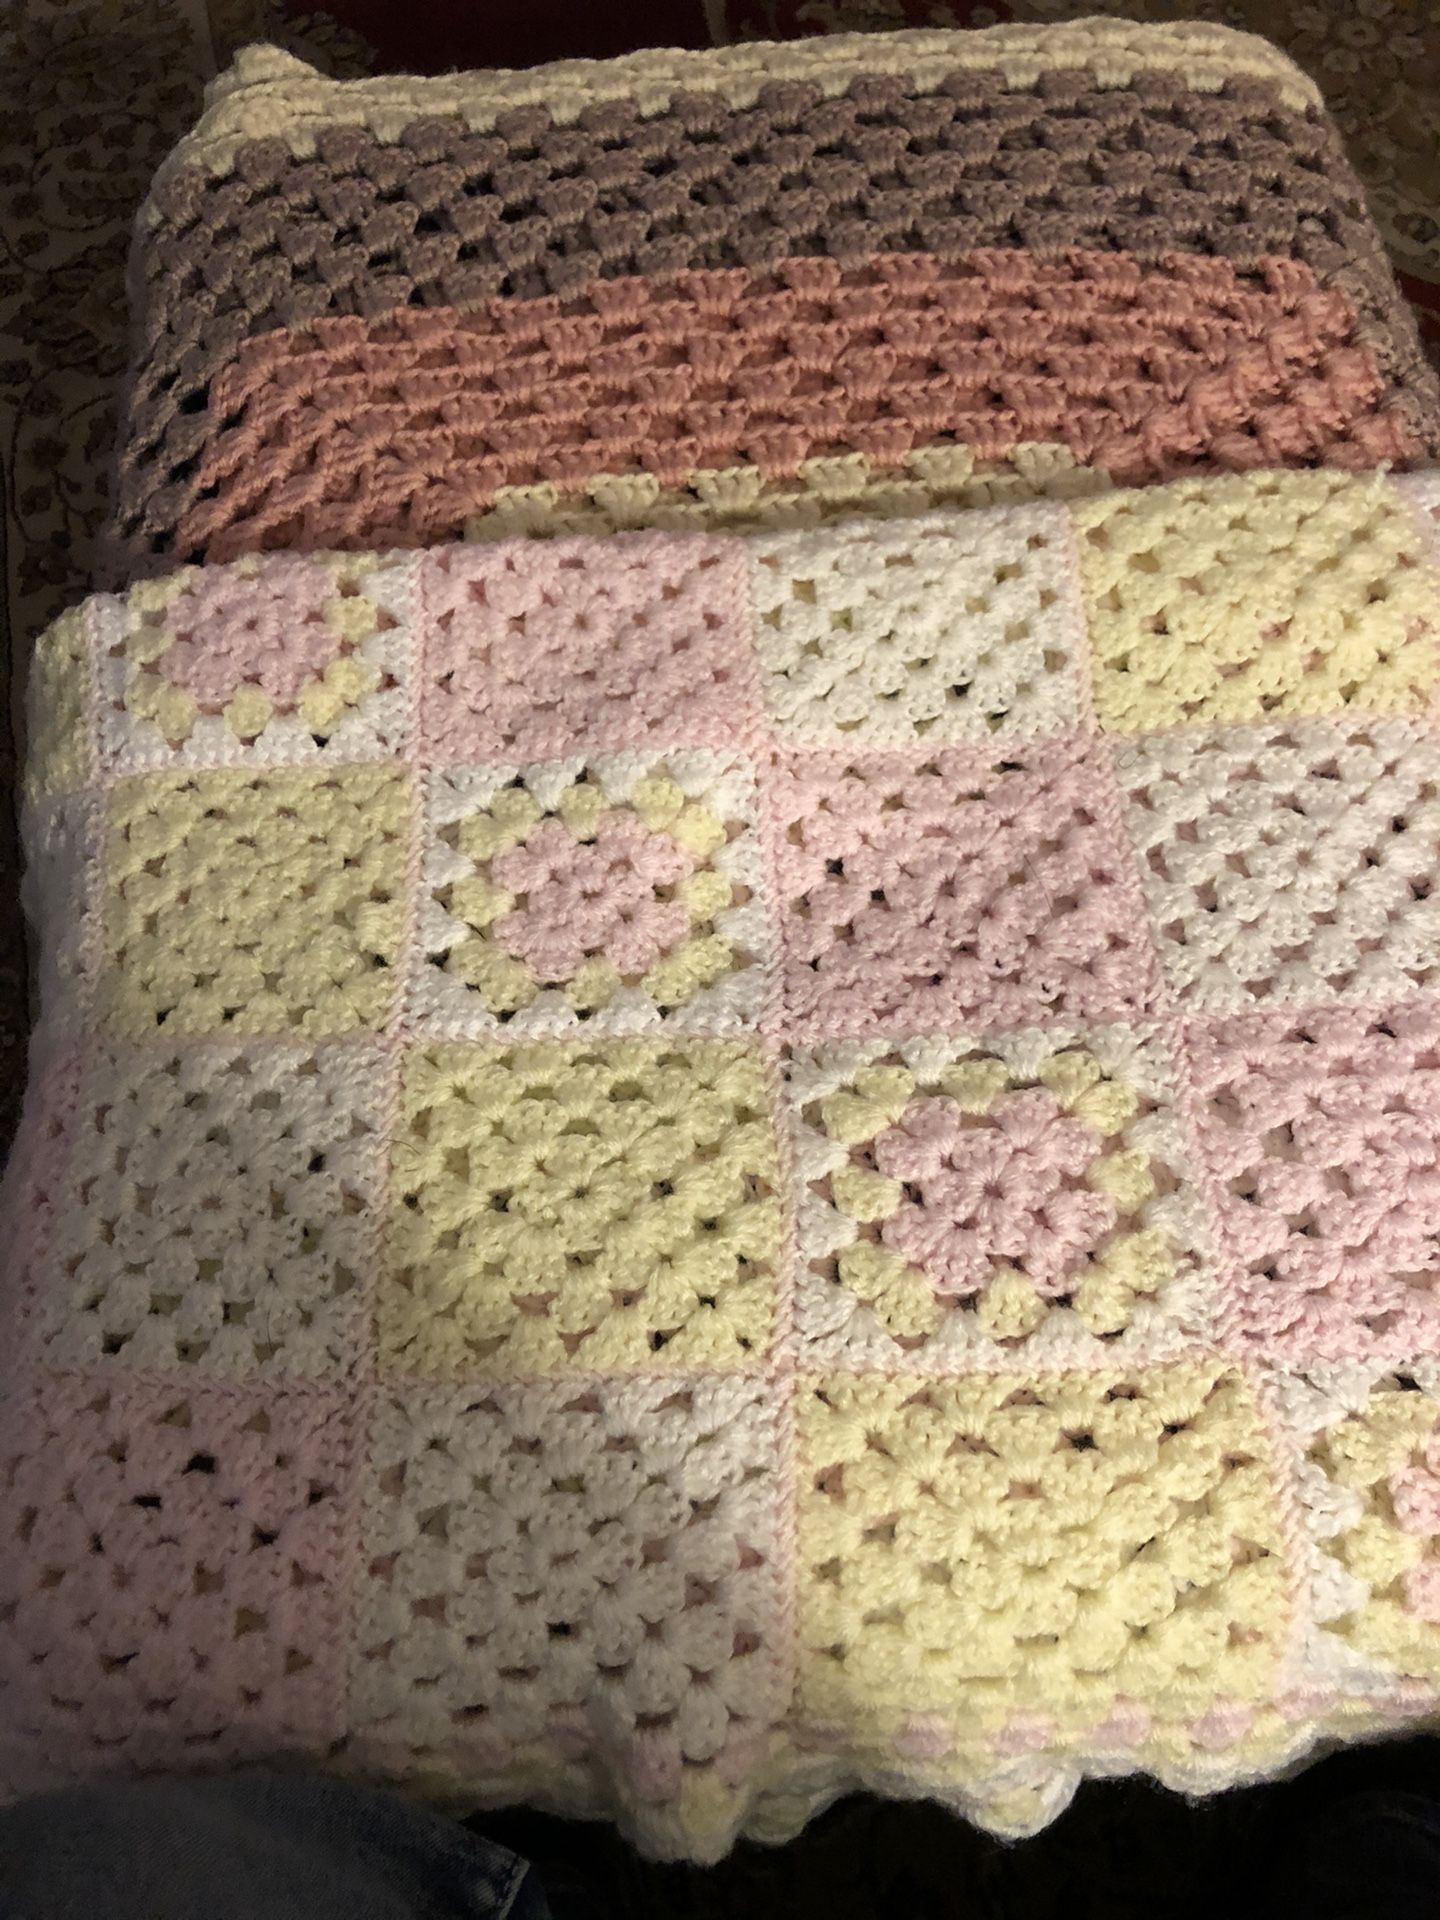 Crocheted baby blankets and crib sheets